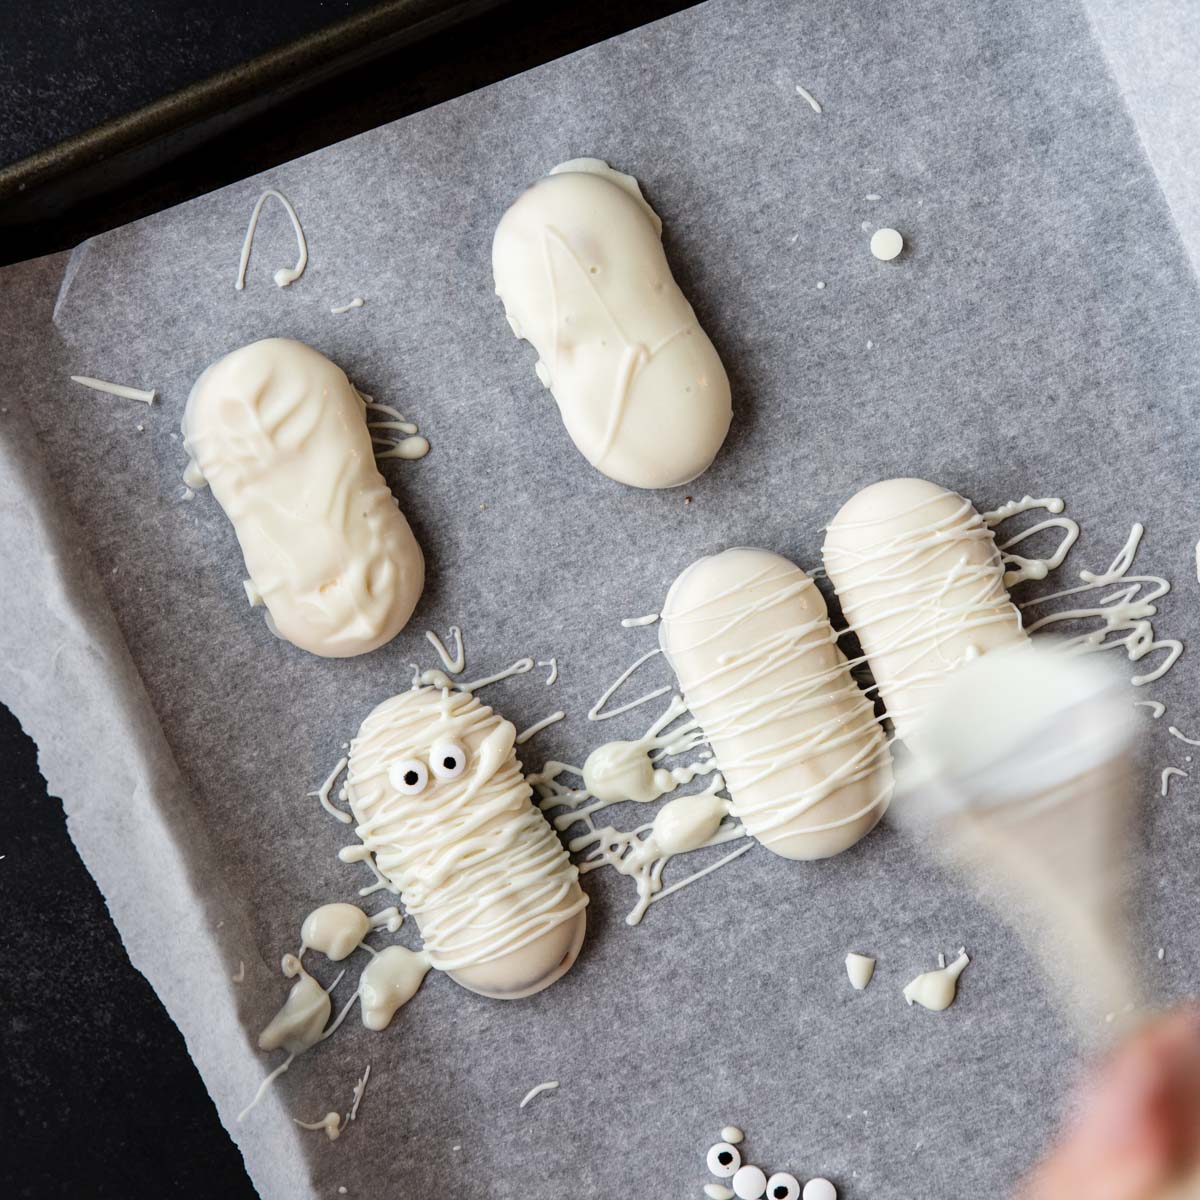 drizzling white chocolate on cookies to make them look like mummies